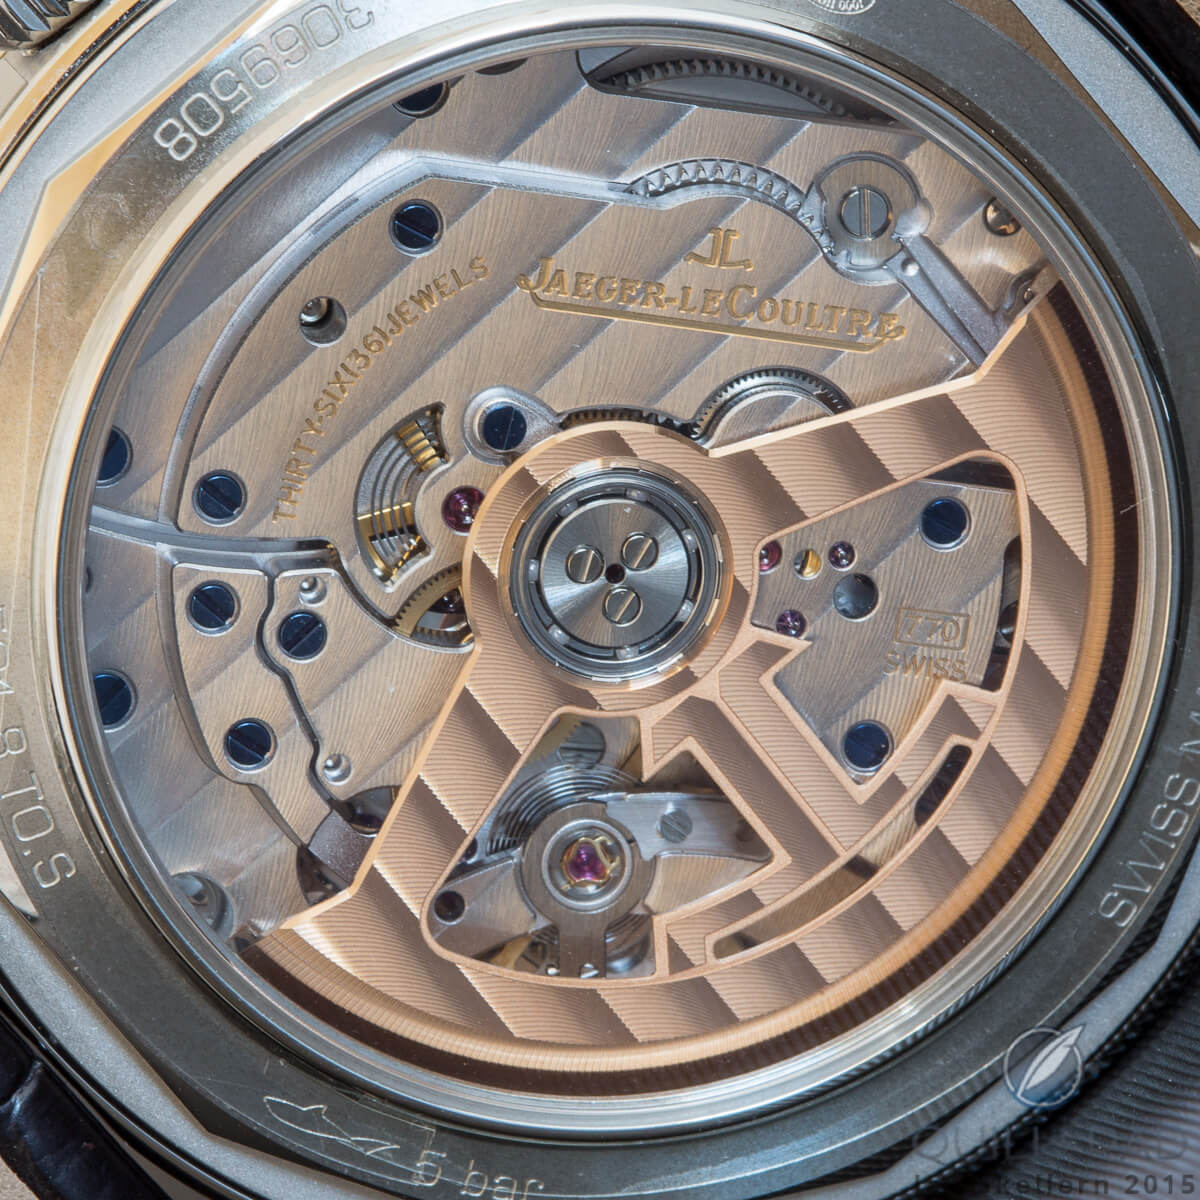 A close look at the beautifully finished Jaeger-LeCoultre Geophysic movement with the small dead seconds spring visible next to the center of the rotor